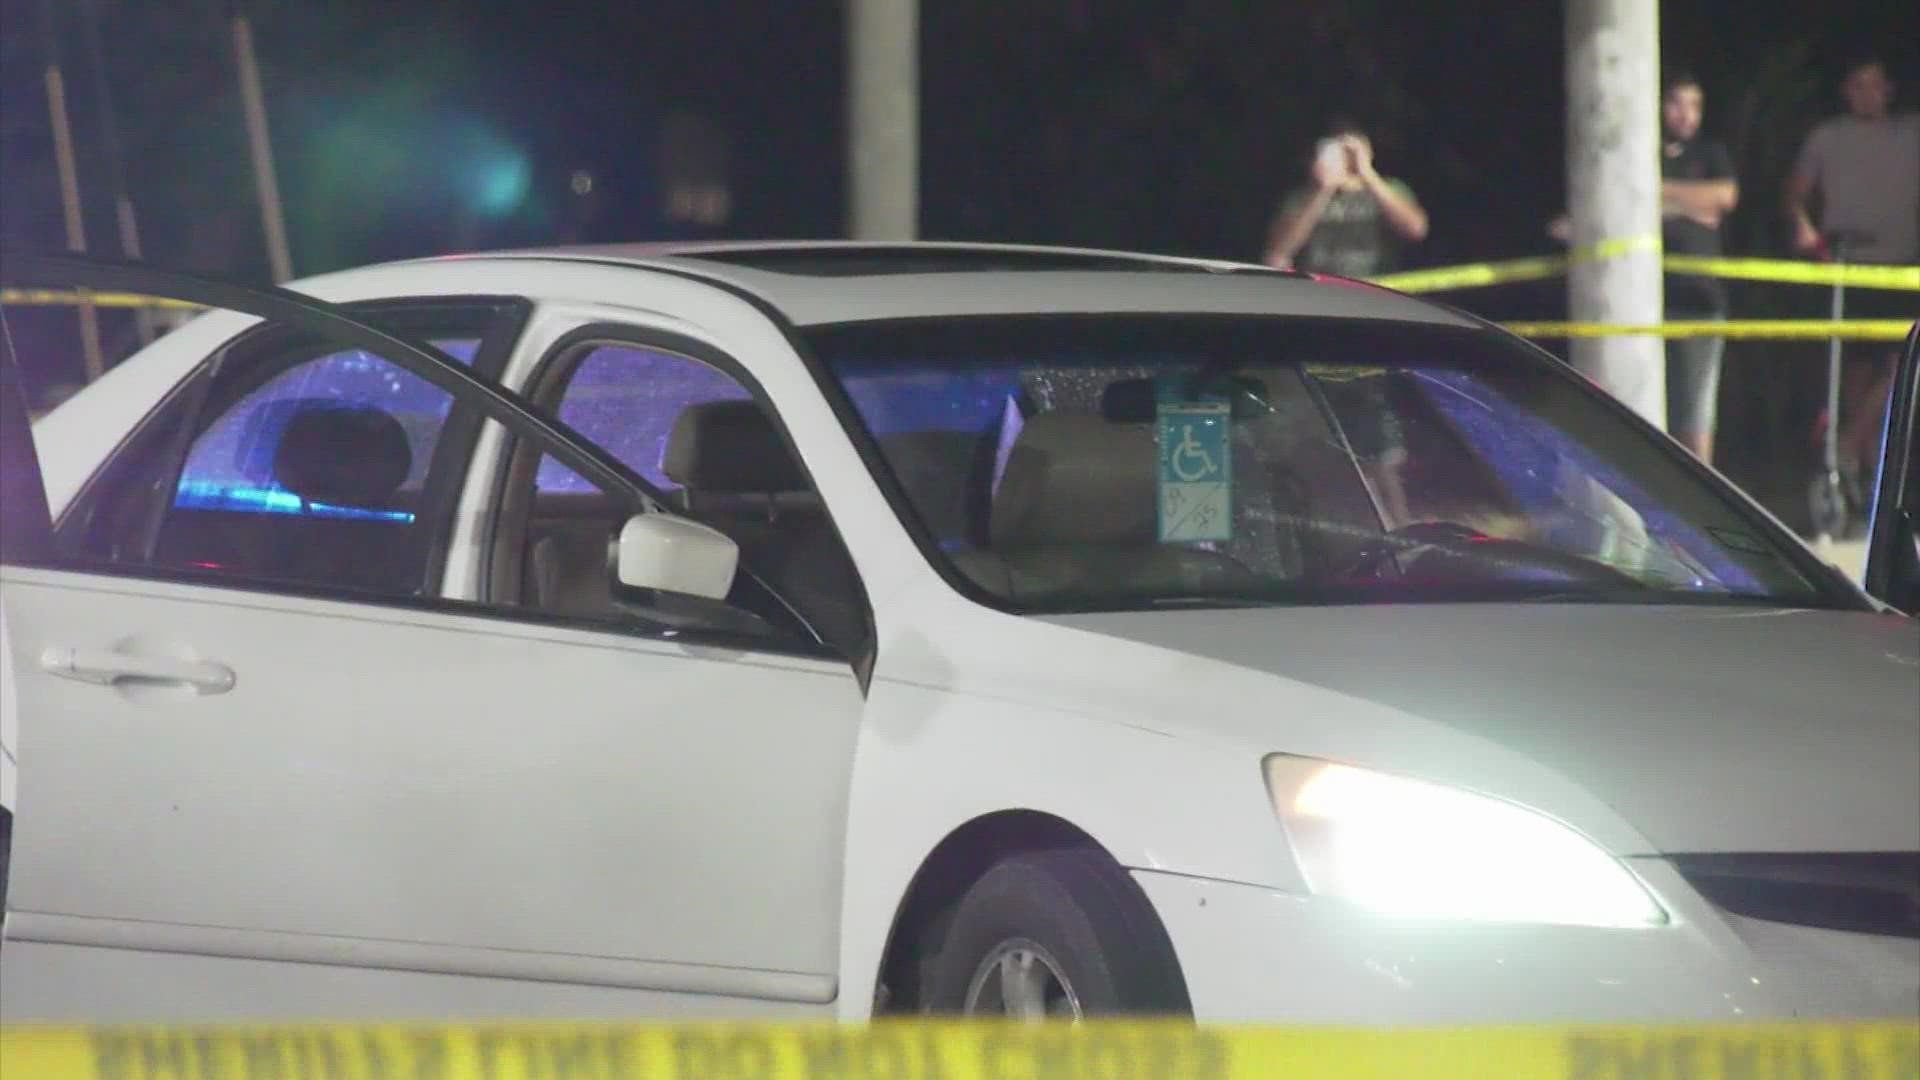 An off-duty Harris County sheriff’s deputy who was on his way to work came across the shooting scene.